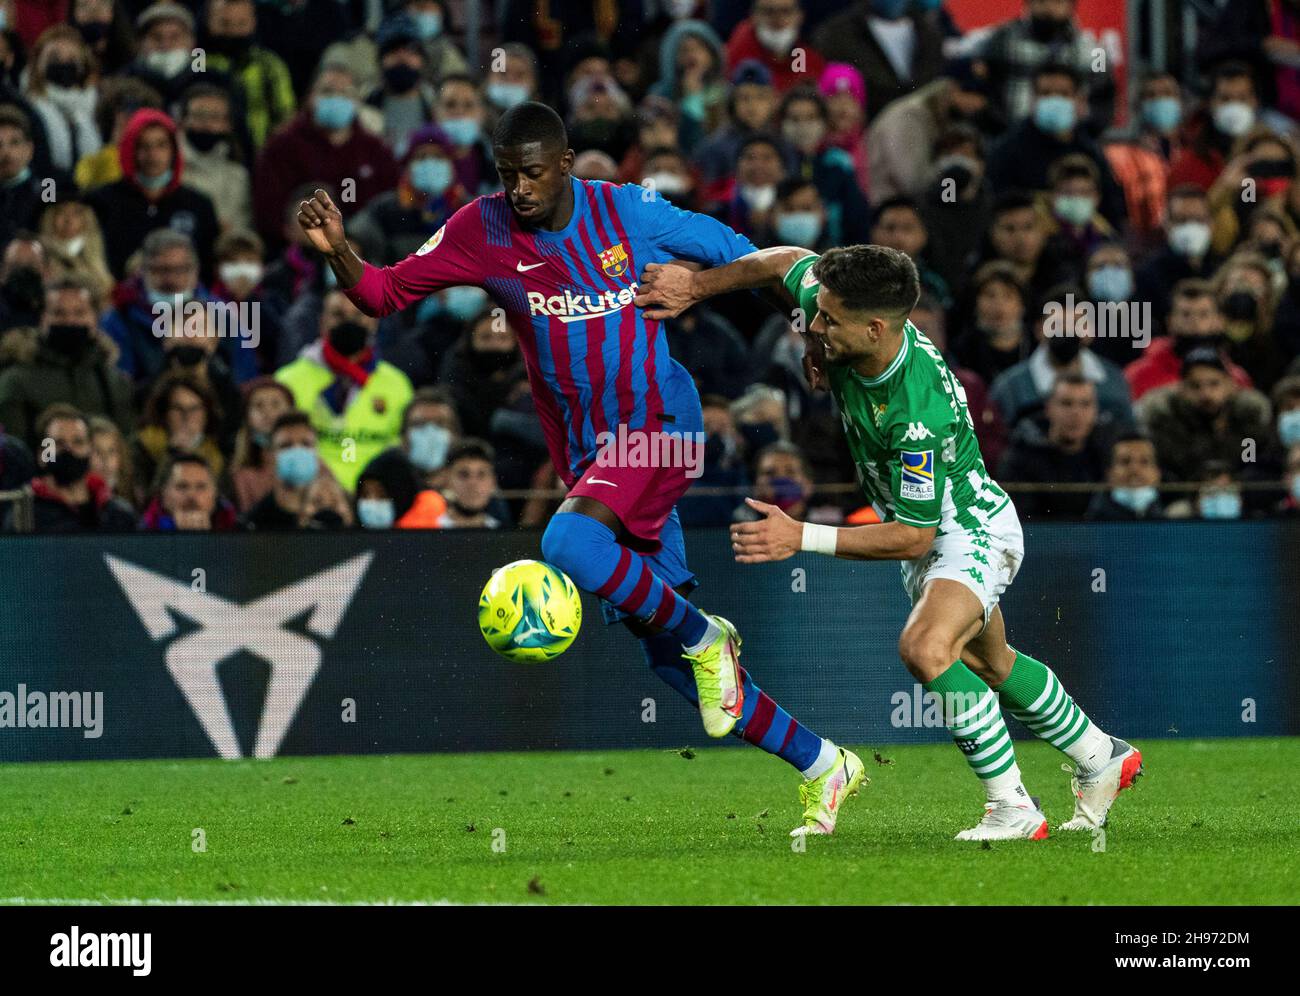 Barcelona, Spain. 4th Dec, 2021. Barcelona's Ousmane Dembele (L) vies with Real Betis' Alex Moreno during a Spanish first division league football match between FC Barcelona and Real Betis in Barcelona, Spain, Dec. 4, 2021. Credit: Joan Gosa/Xinhua/Alamy Live News Stock Photo